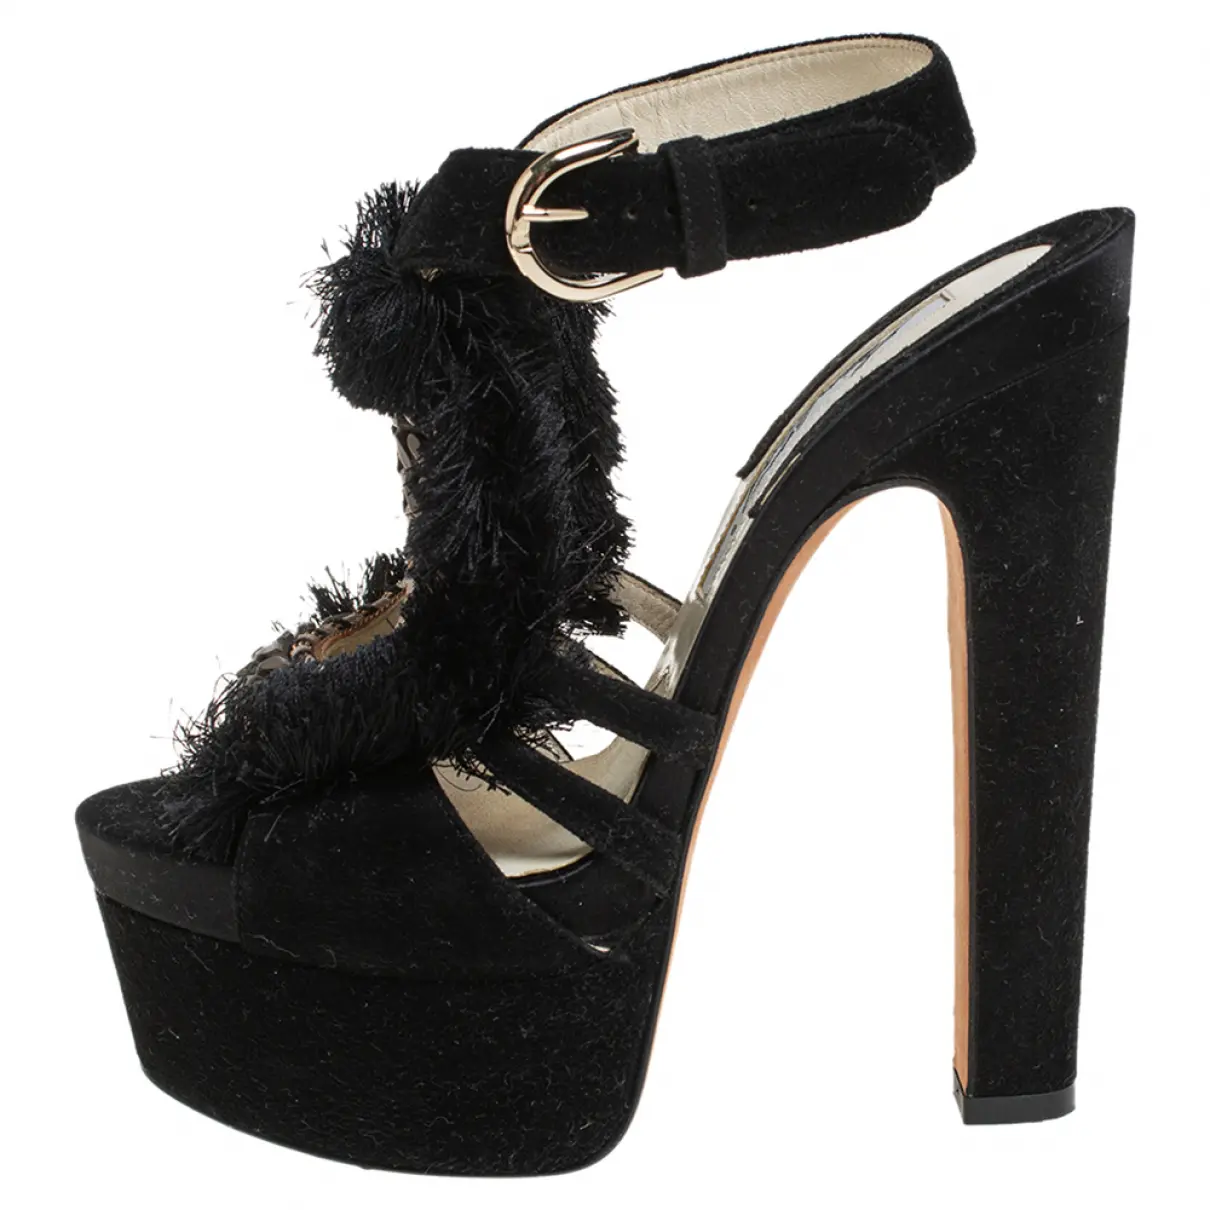 Buy Brian Atwood Sandals online